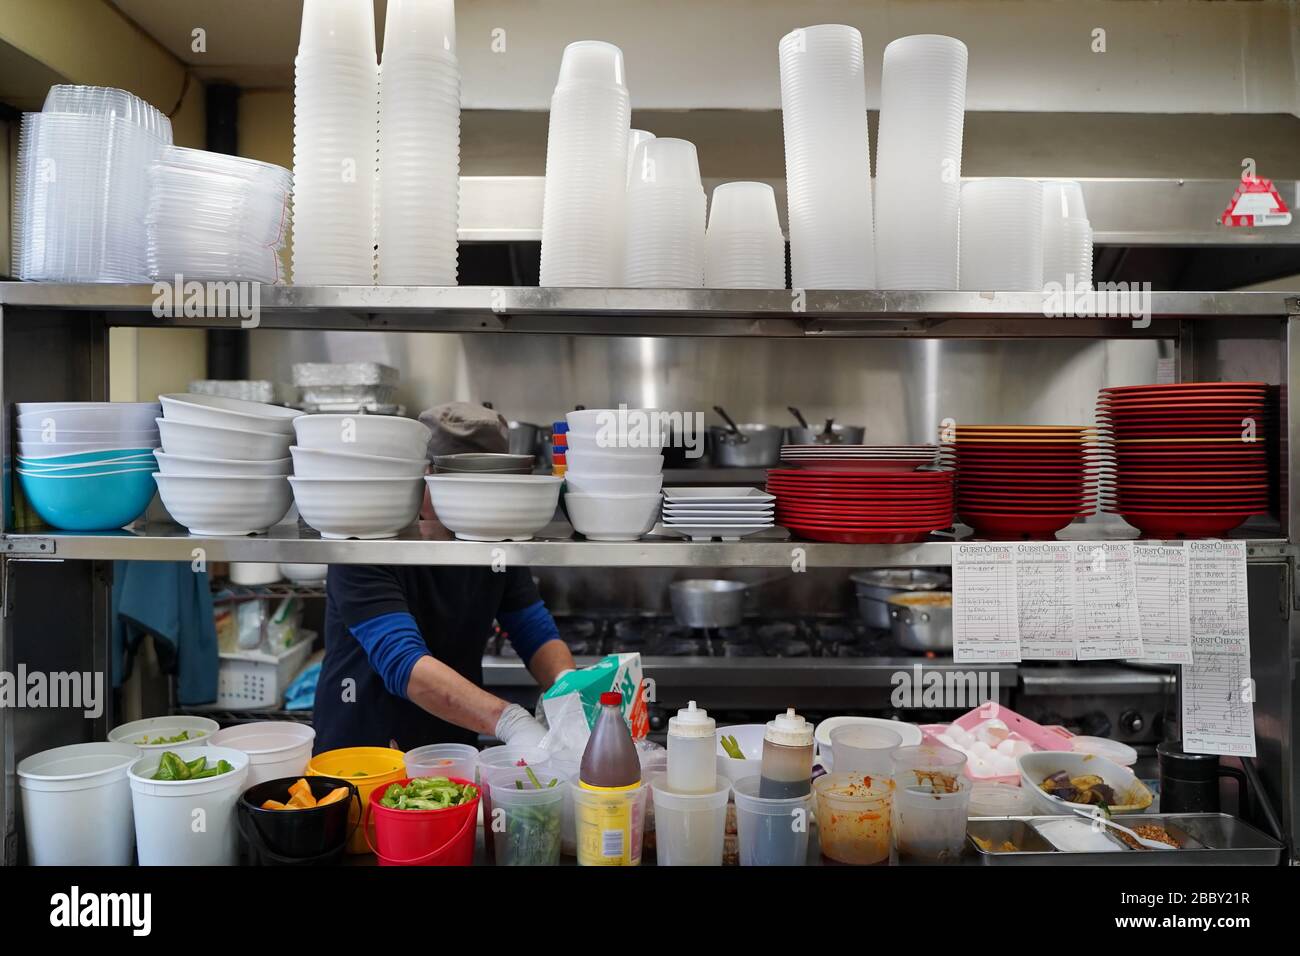 https://c8.alamy.com/comp/2BBY21R/new-york-ny-usa-february-28-2020-new-york-ny-usa-february-28-2020-a-cook-works-tirelessly-behind-the-stacks-of-bowls-and-containers-2BBY21R.jpg